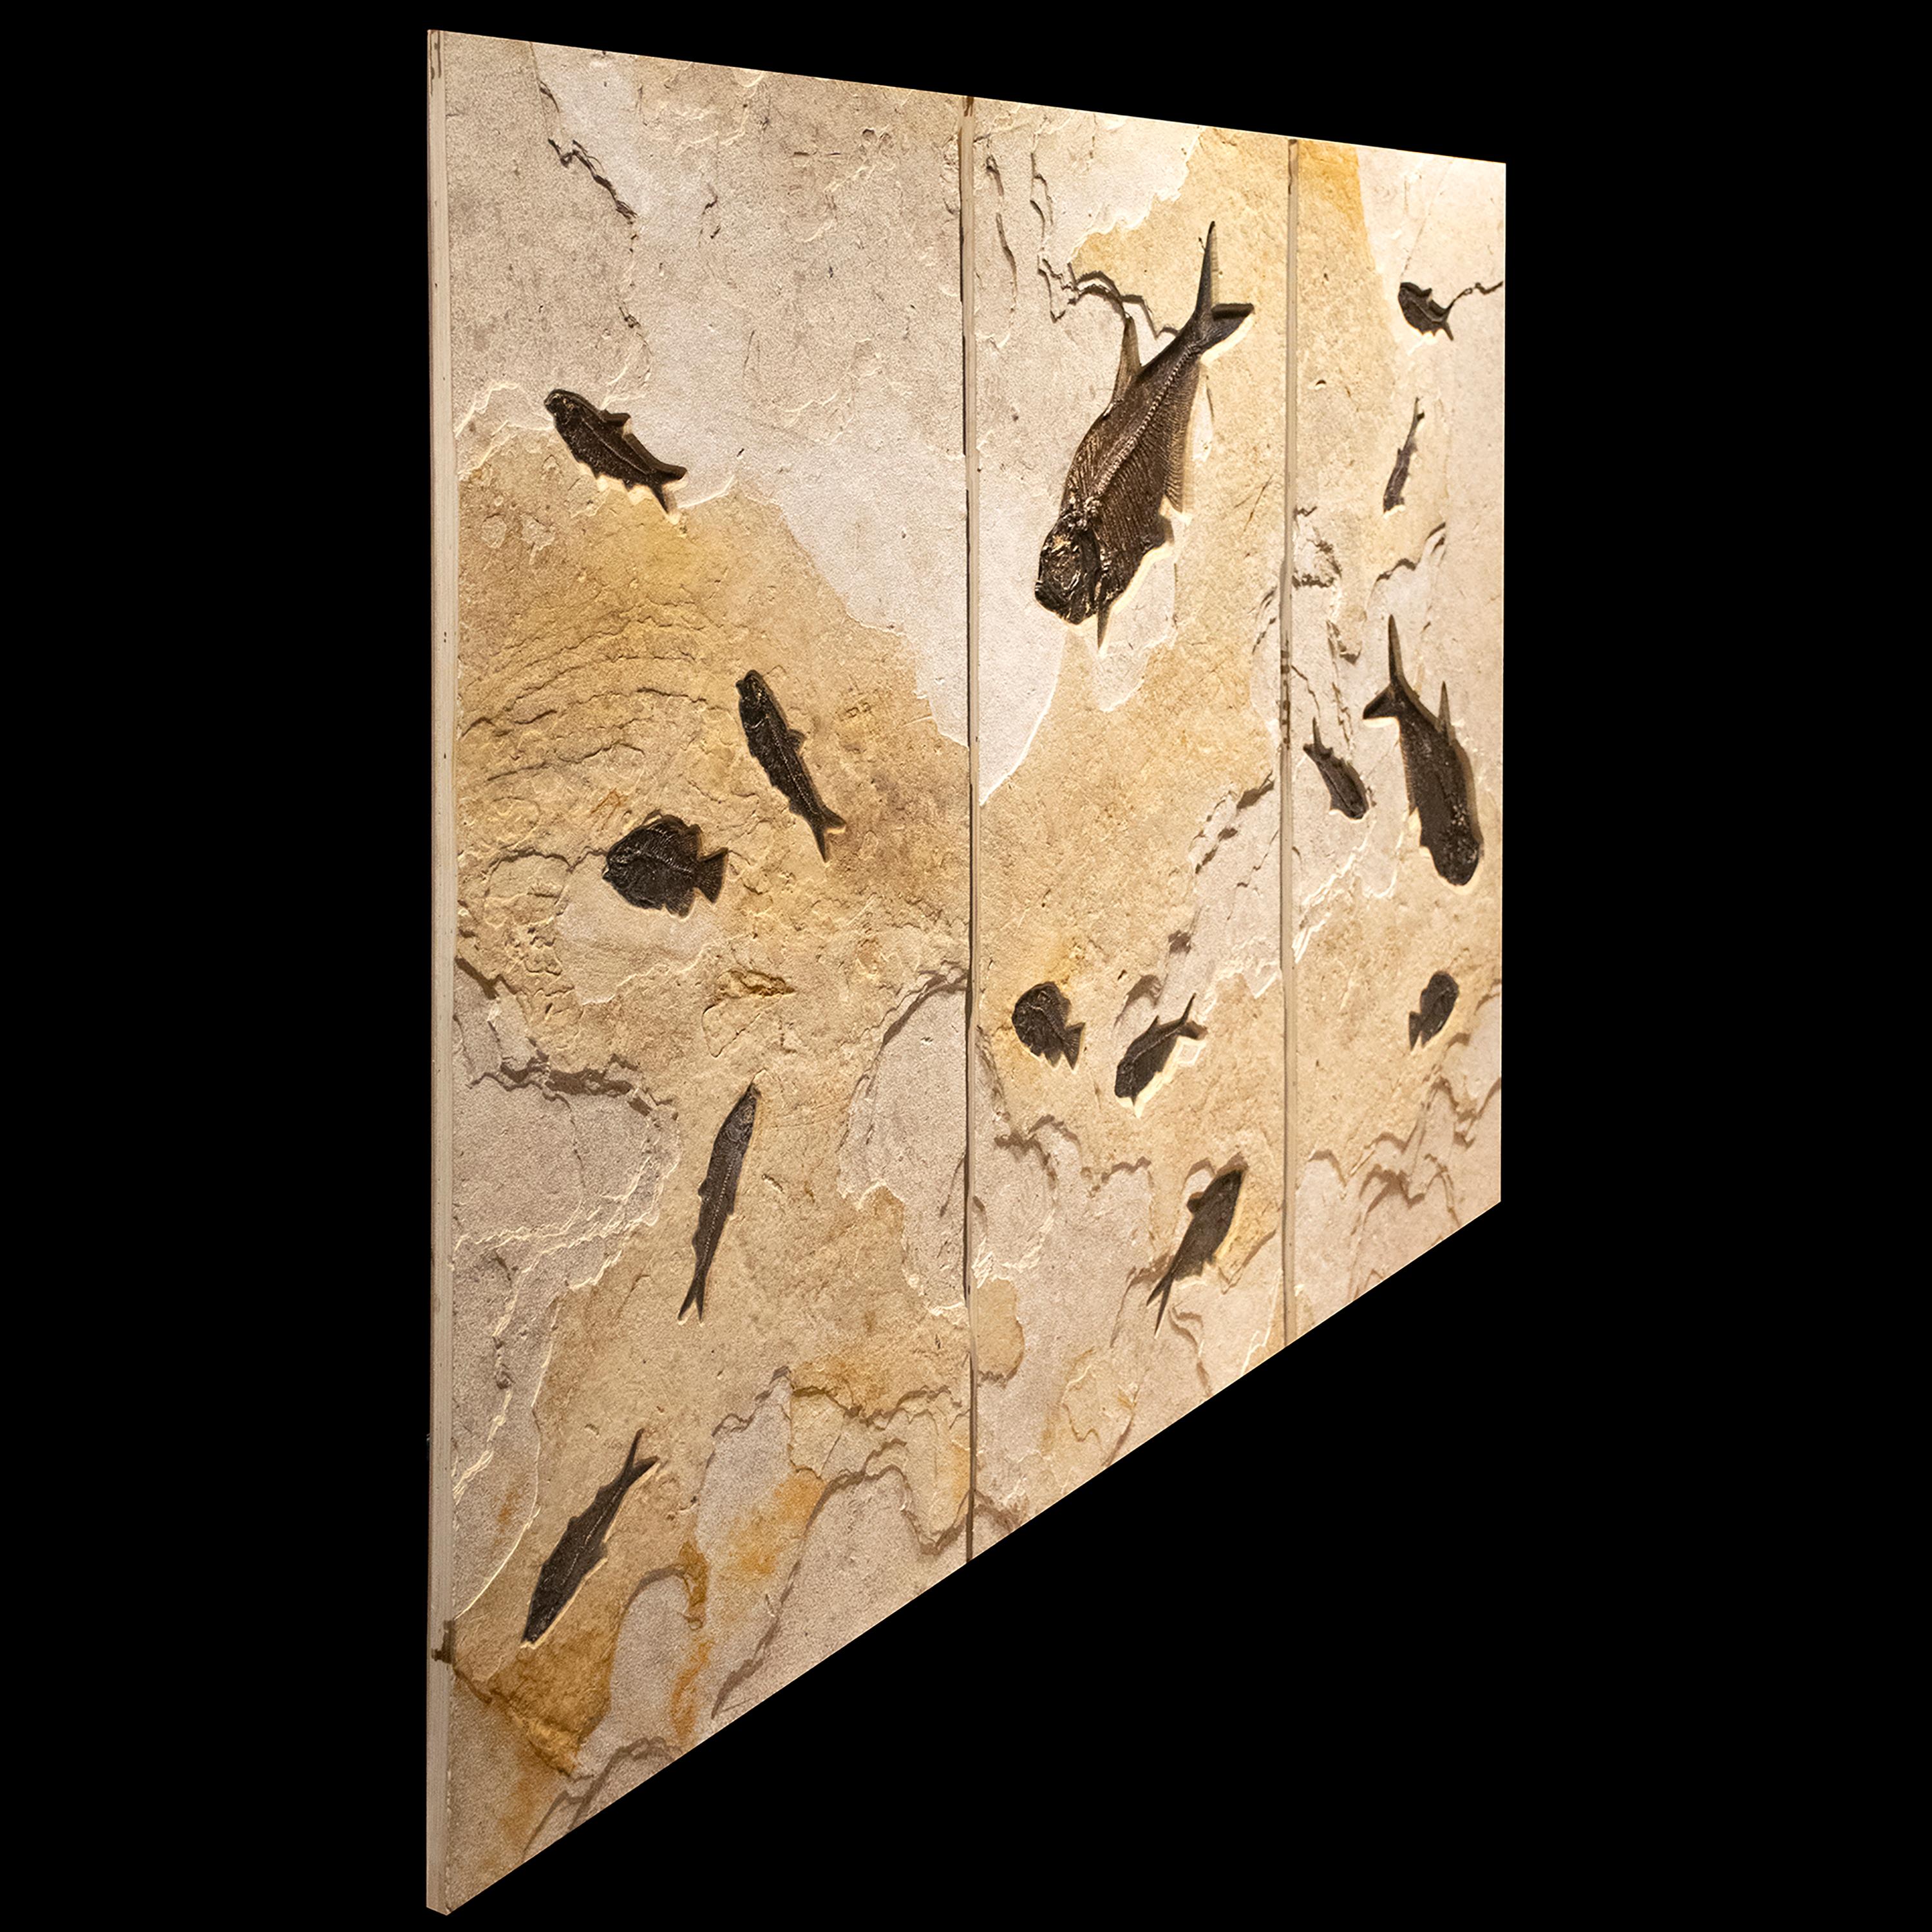 Organic Material 50 Million Year Old Eocene Era Fossil Fish Triptych Mural in Stone, from Wyoming